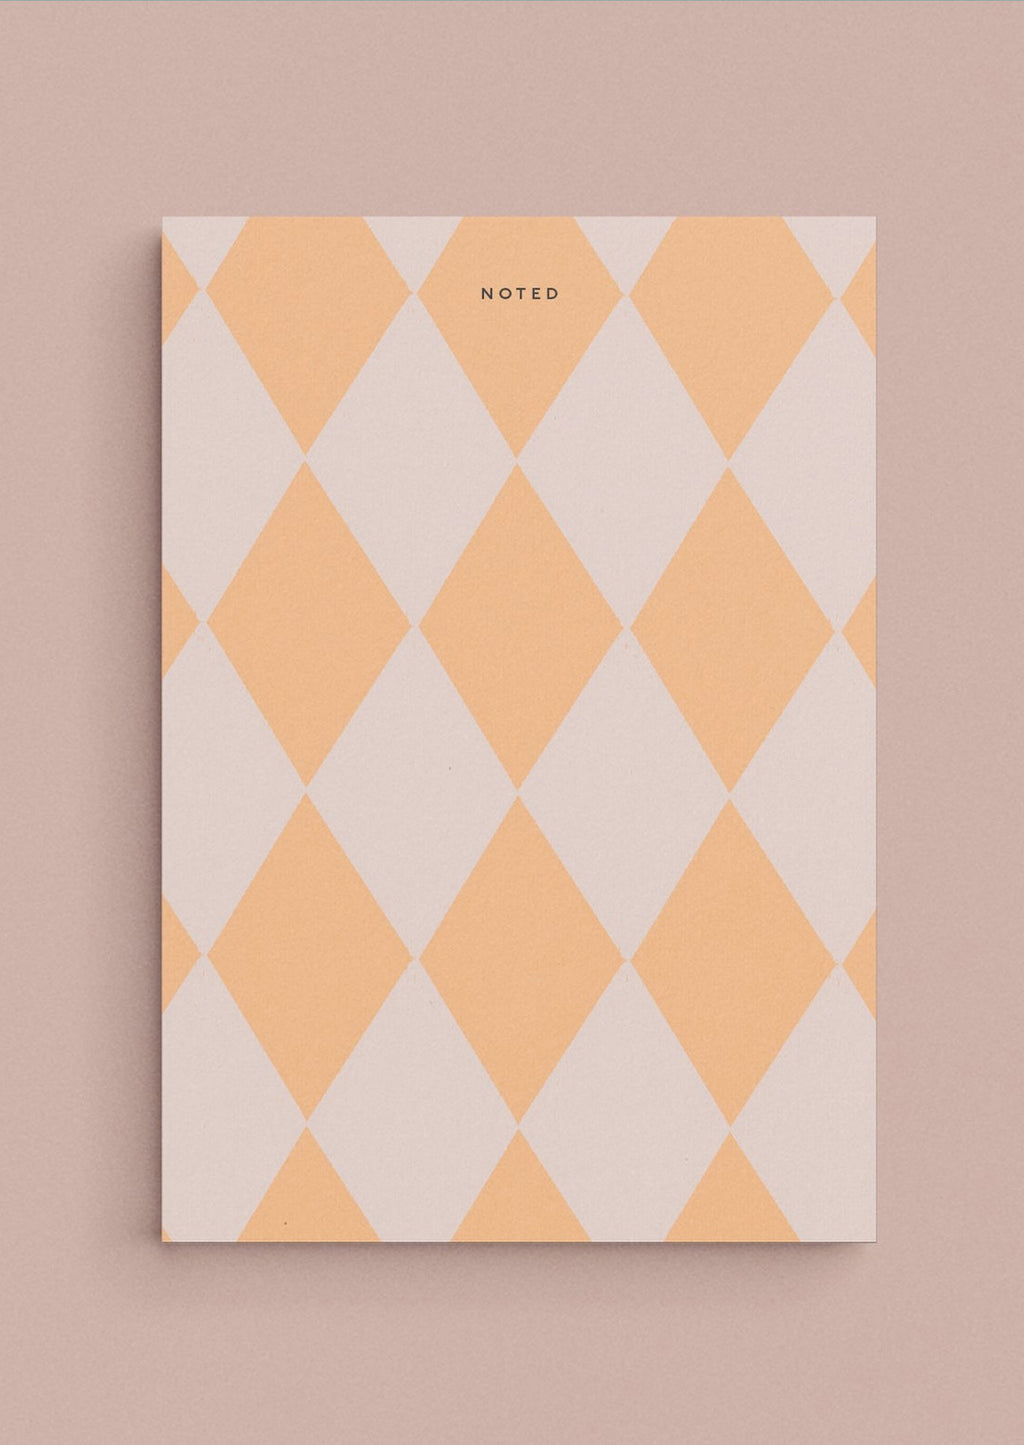 Lavender / Creamsicle Multi: A diamond print notepad in peach and blush reading "NOTED" at the top.